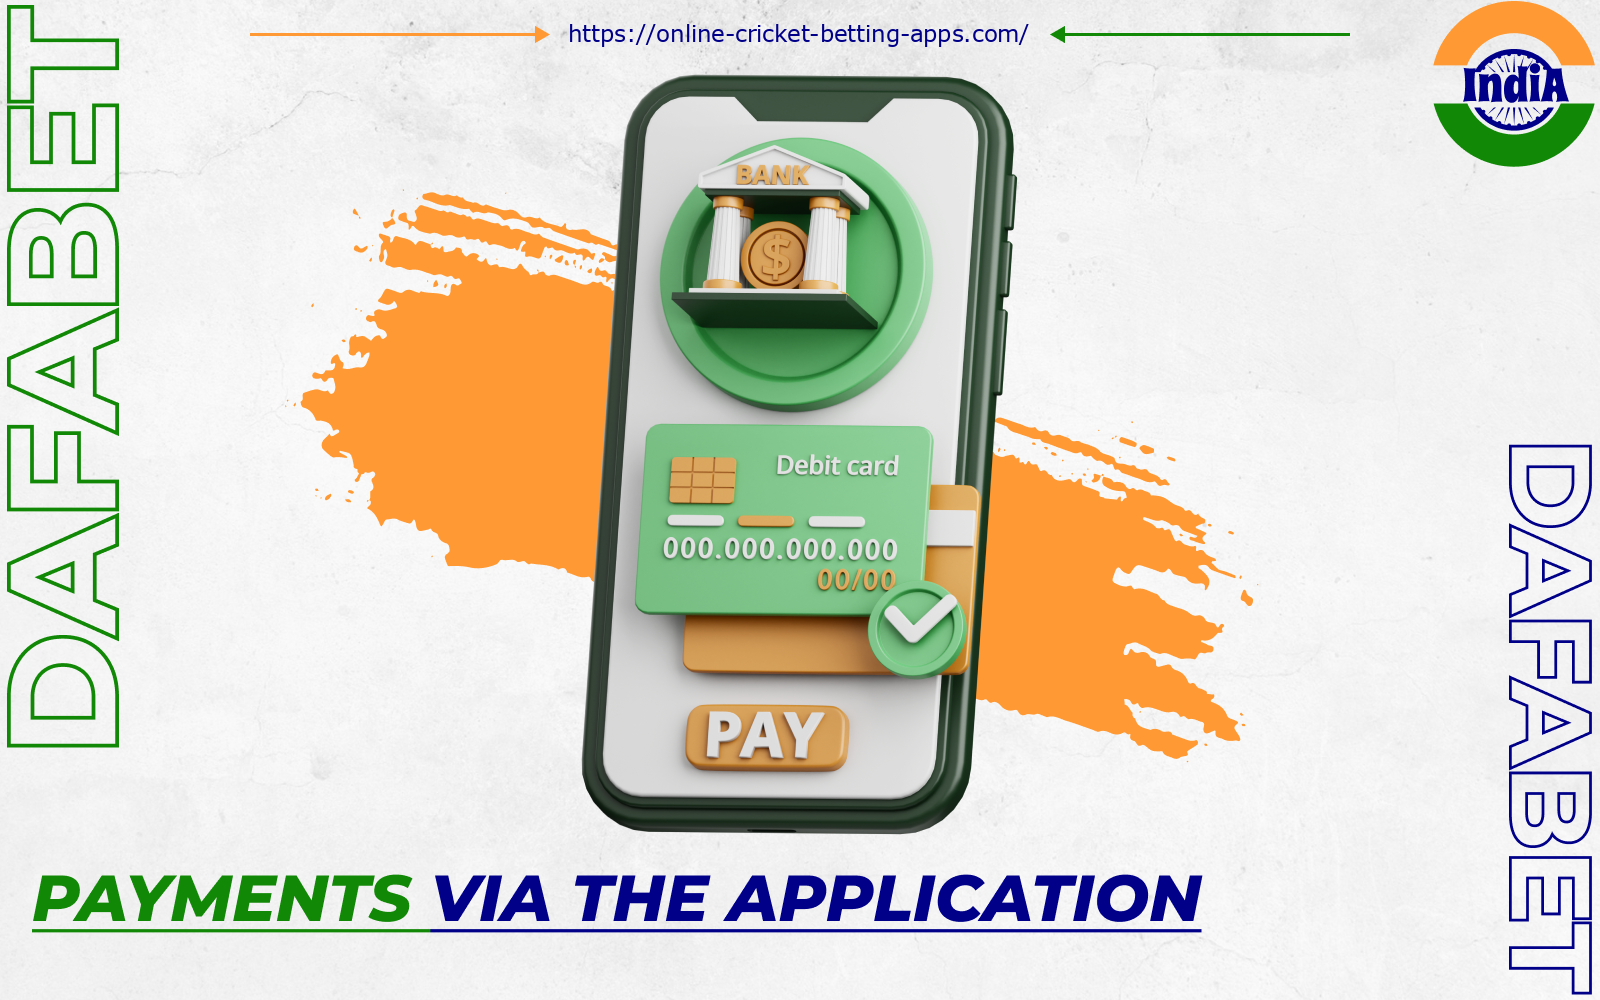 Using the Dafabet mobile app, Indian players can deposit or withdraw money from their balance at any time